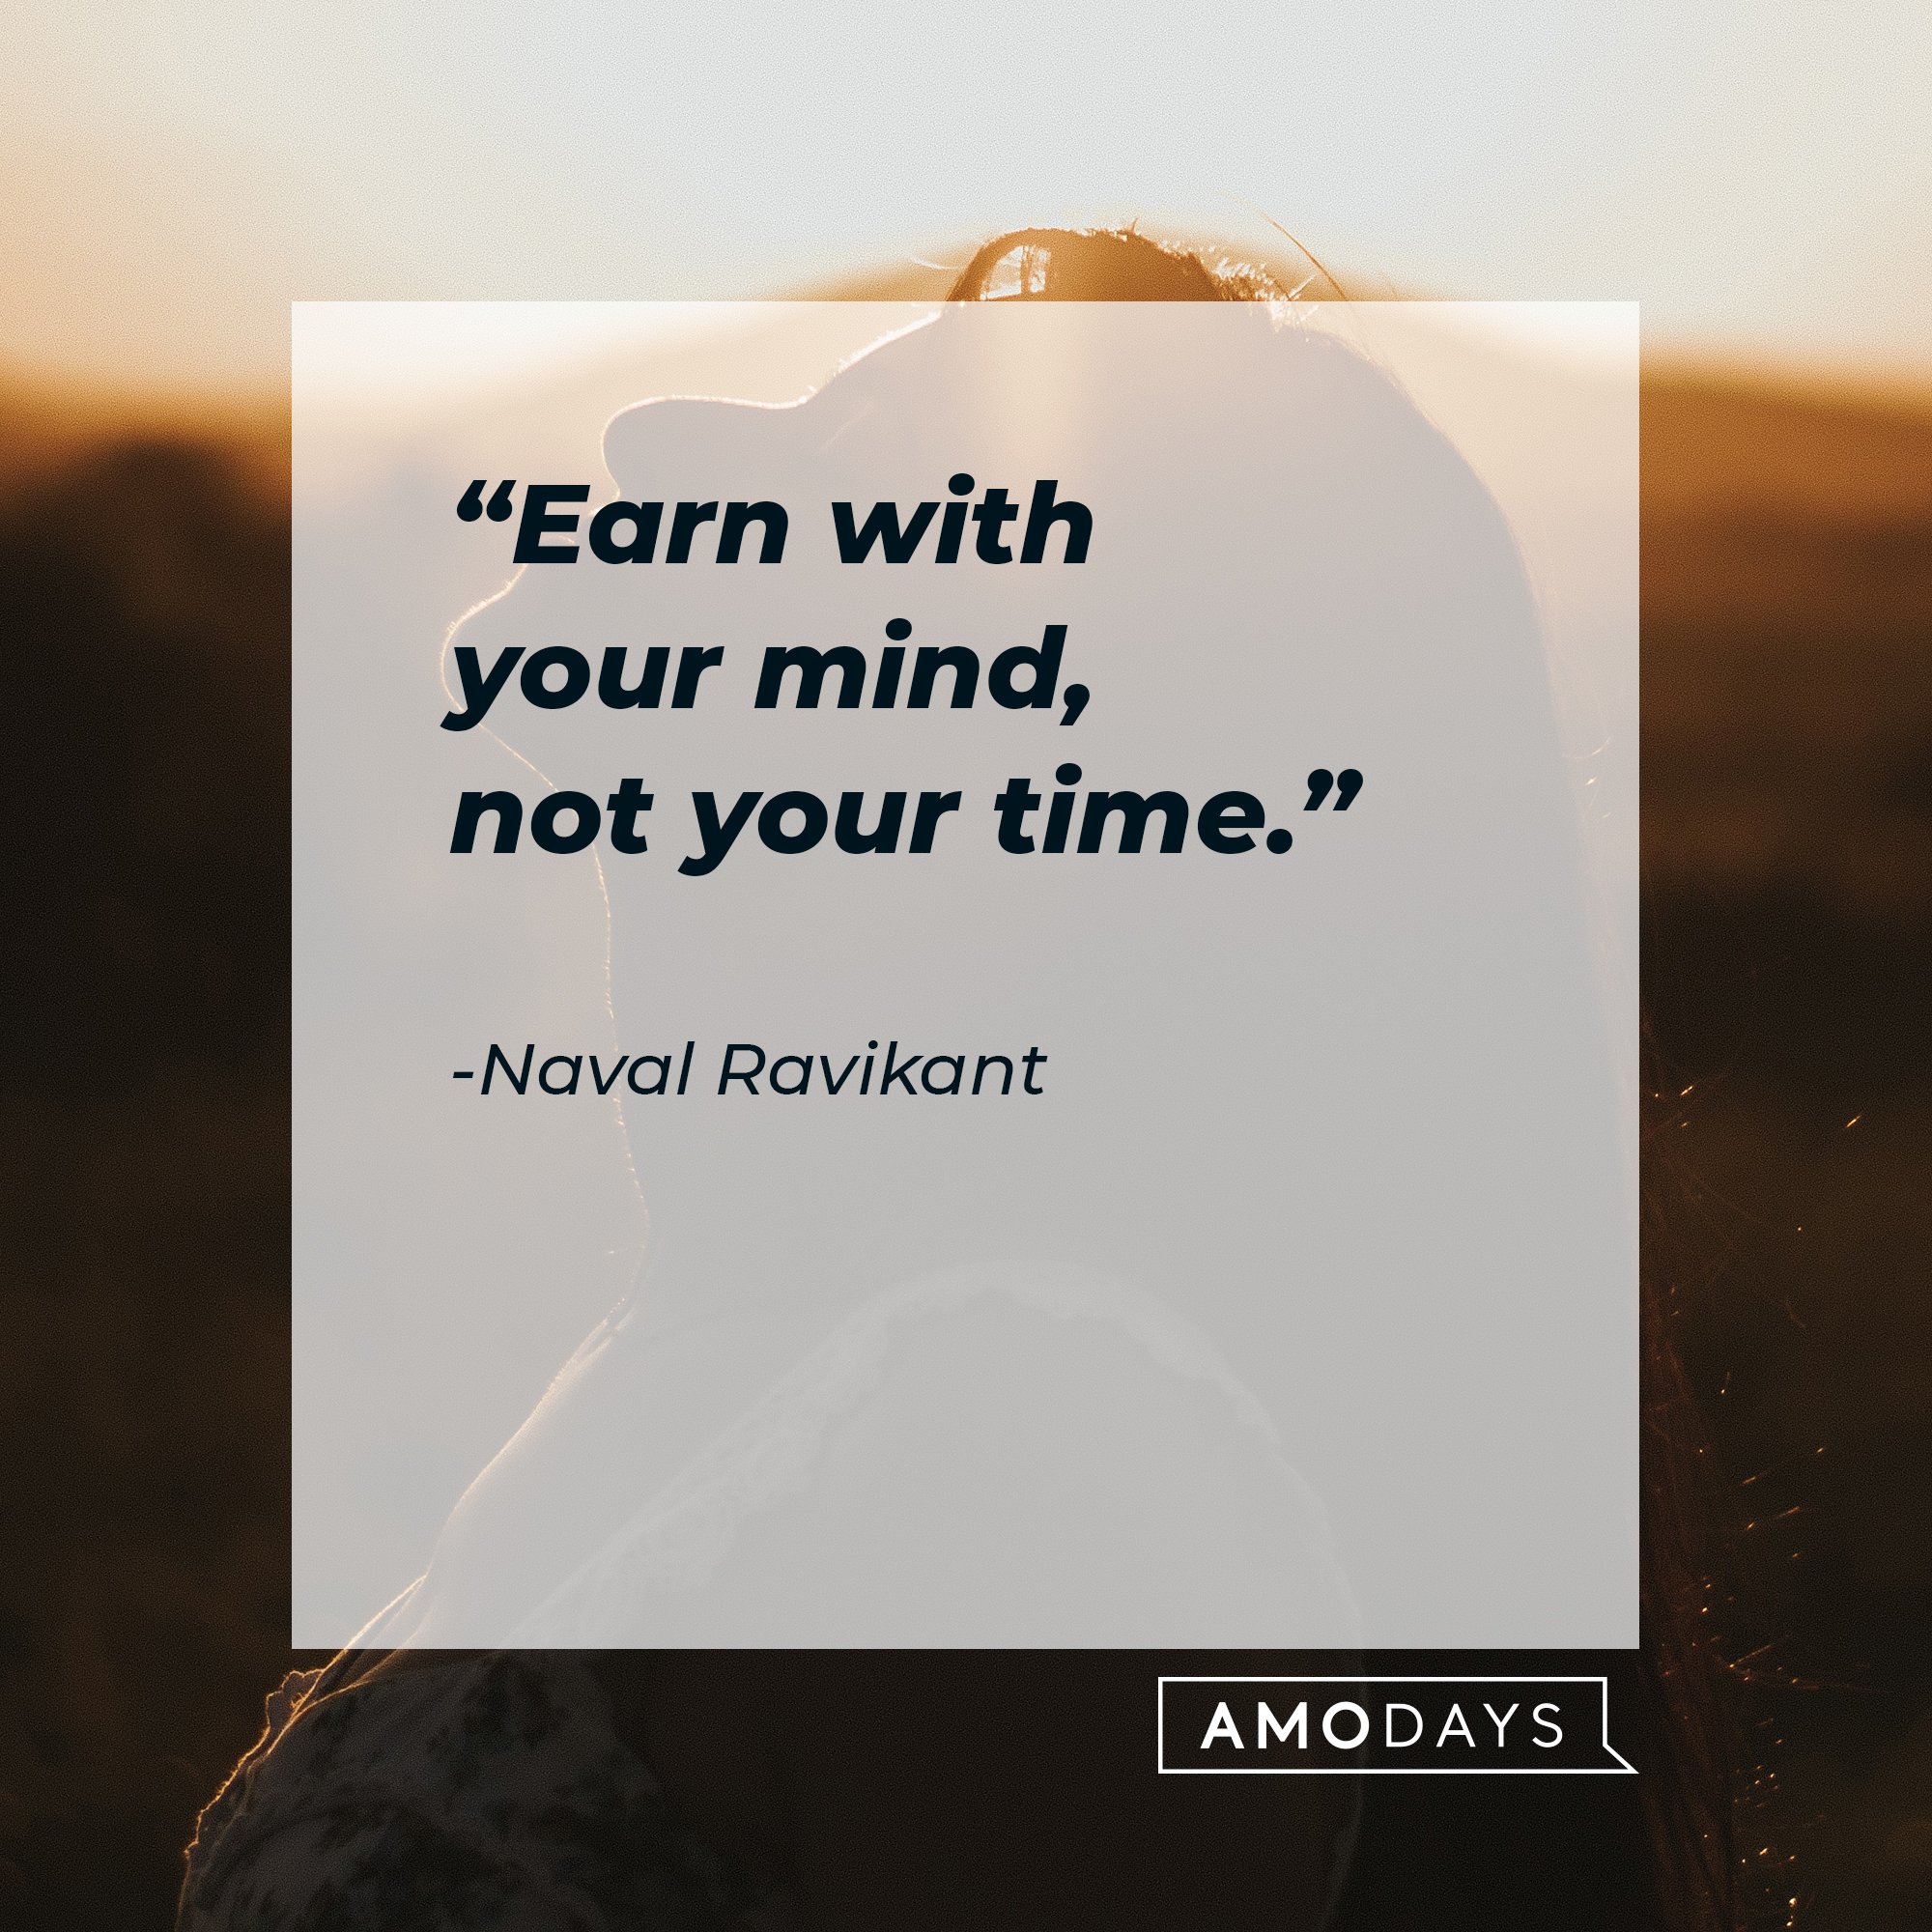 Naval Ravikant's quote: "Earn with your mind, not your time." | Image: AmoDays